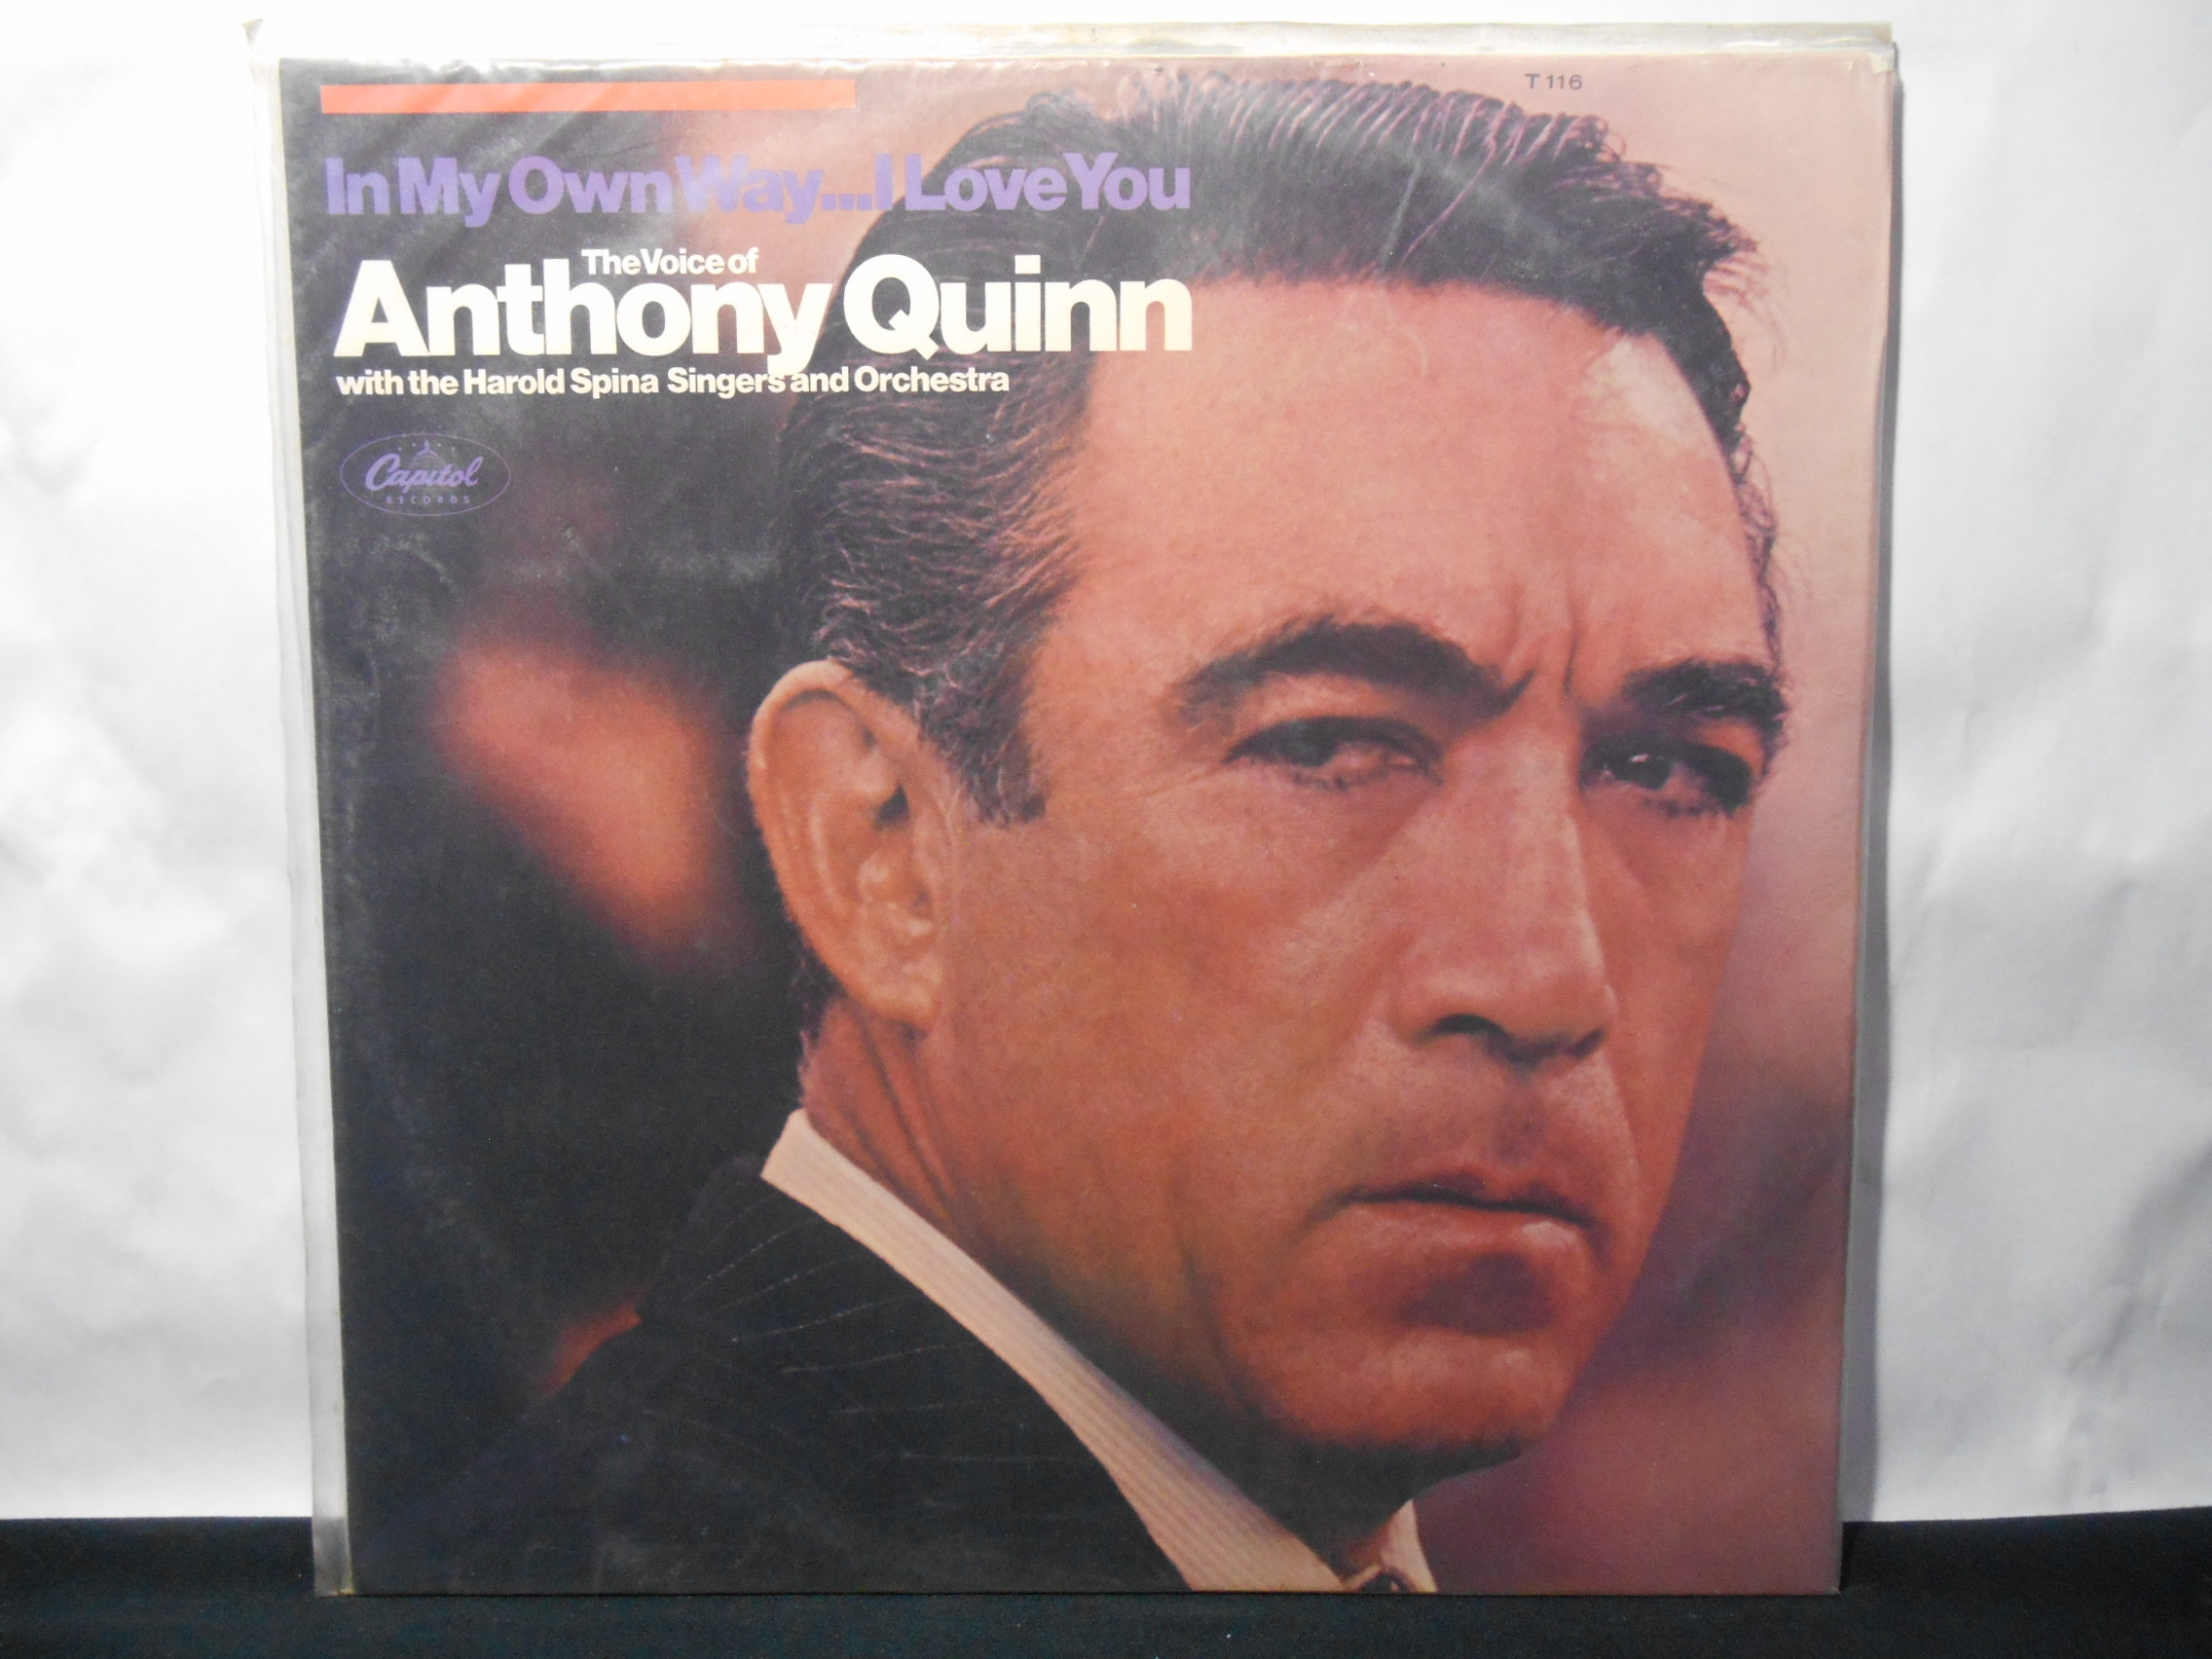 Vinil - Anthony Quinn with The Harold Spina Singers and Orchestra - In My Own Way I Love You